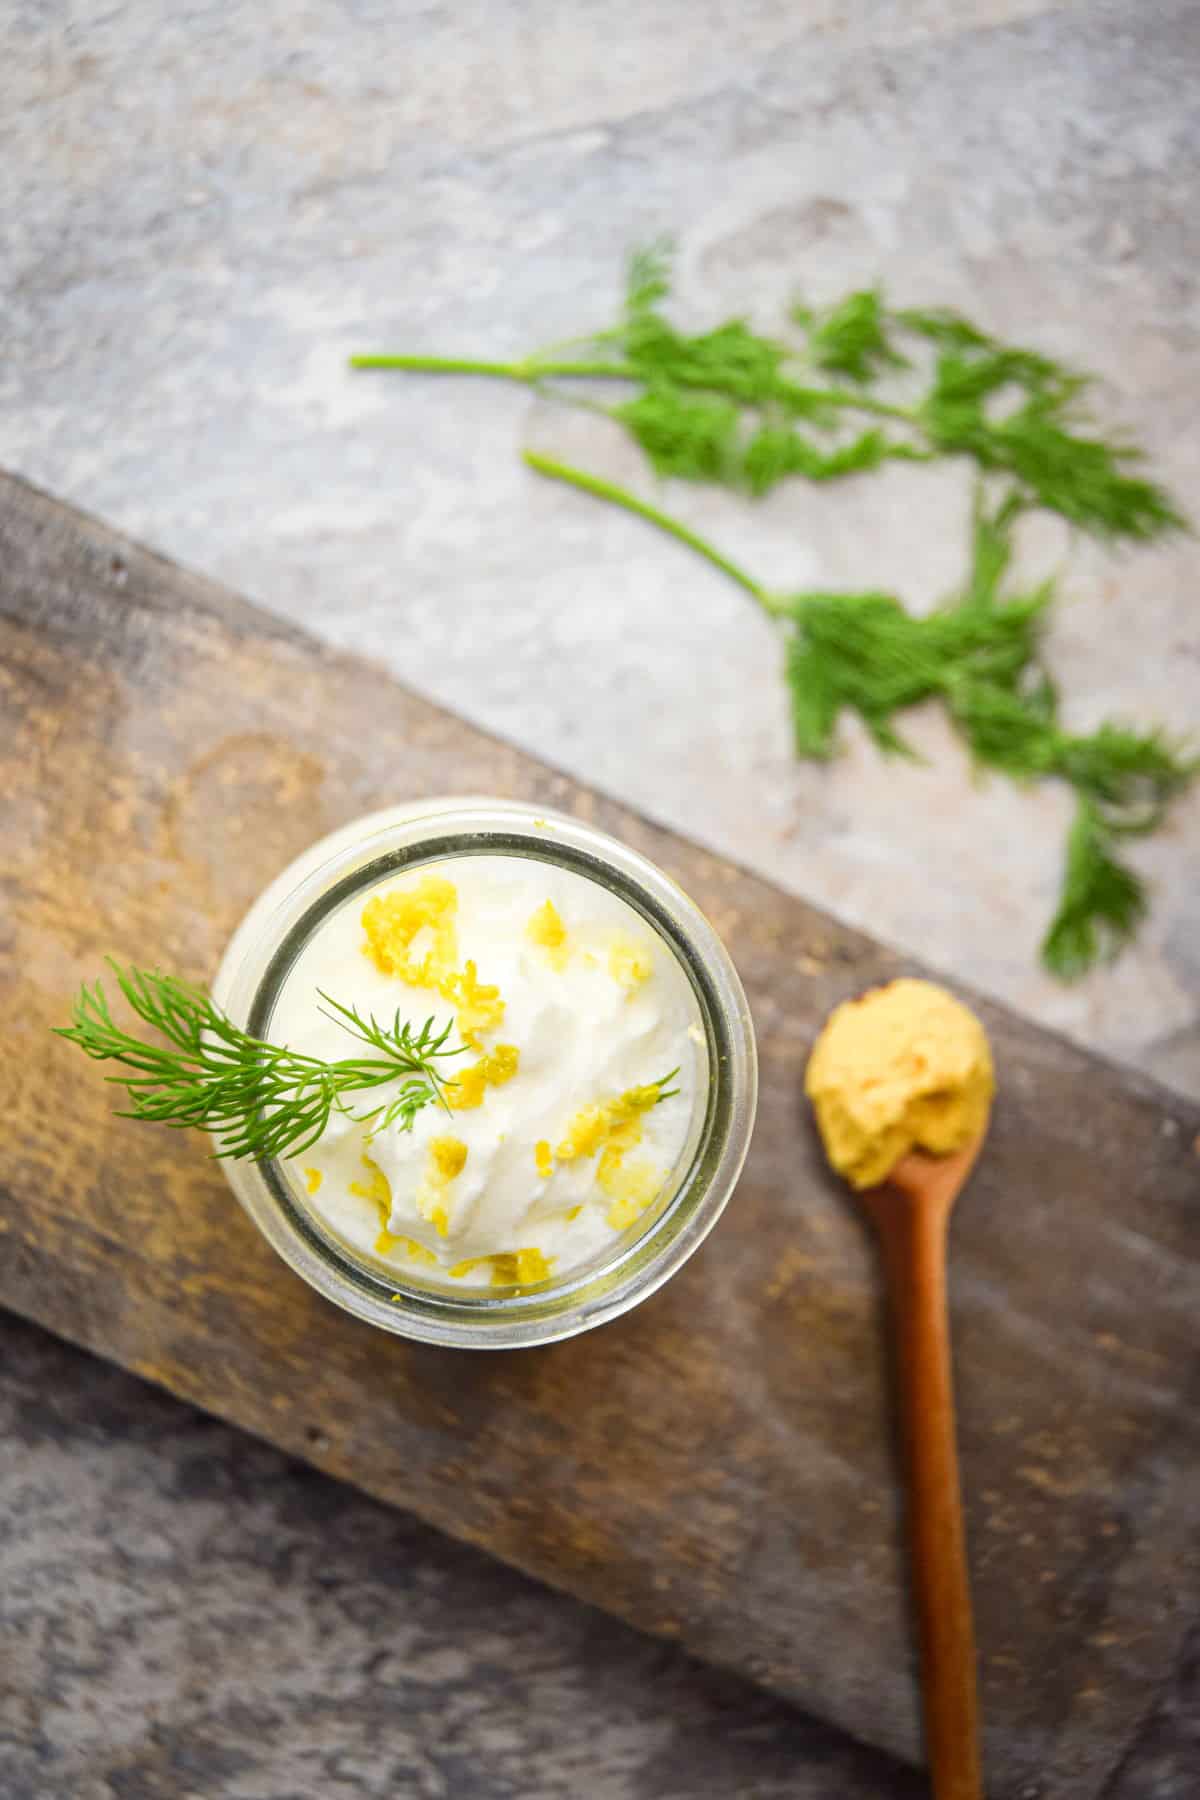 Homemade whipped topping with lemon and dill in small jar.